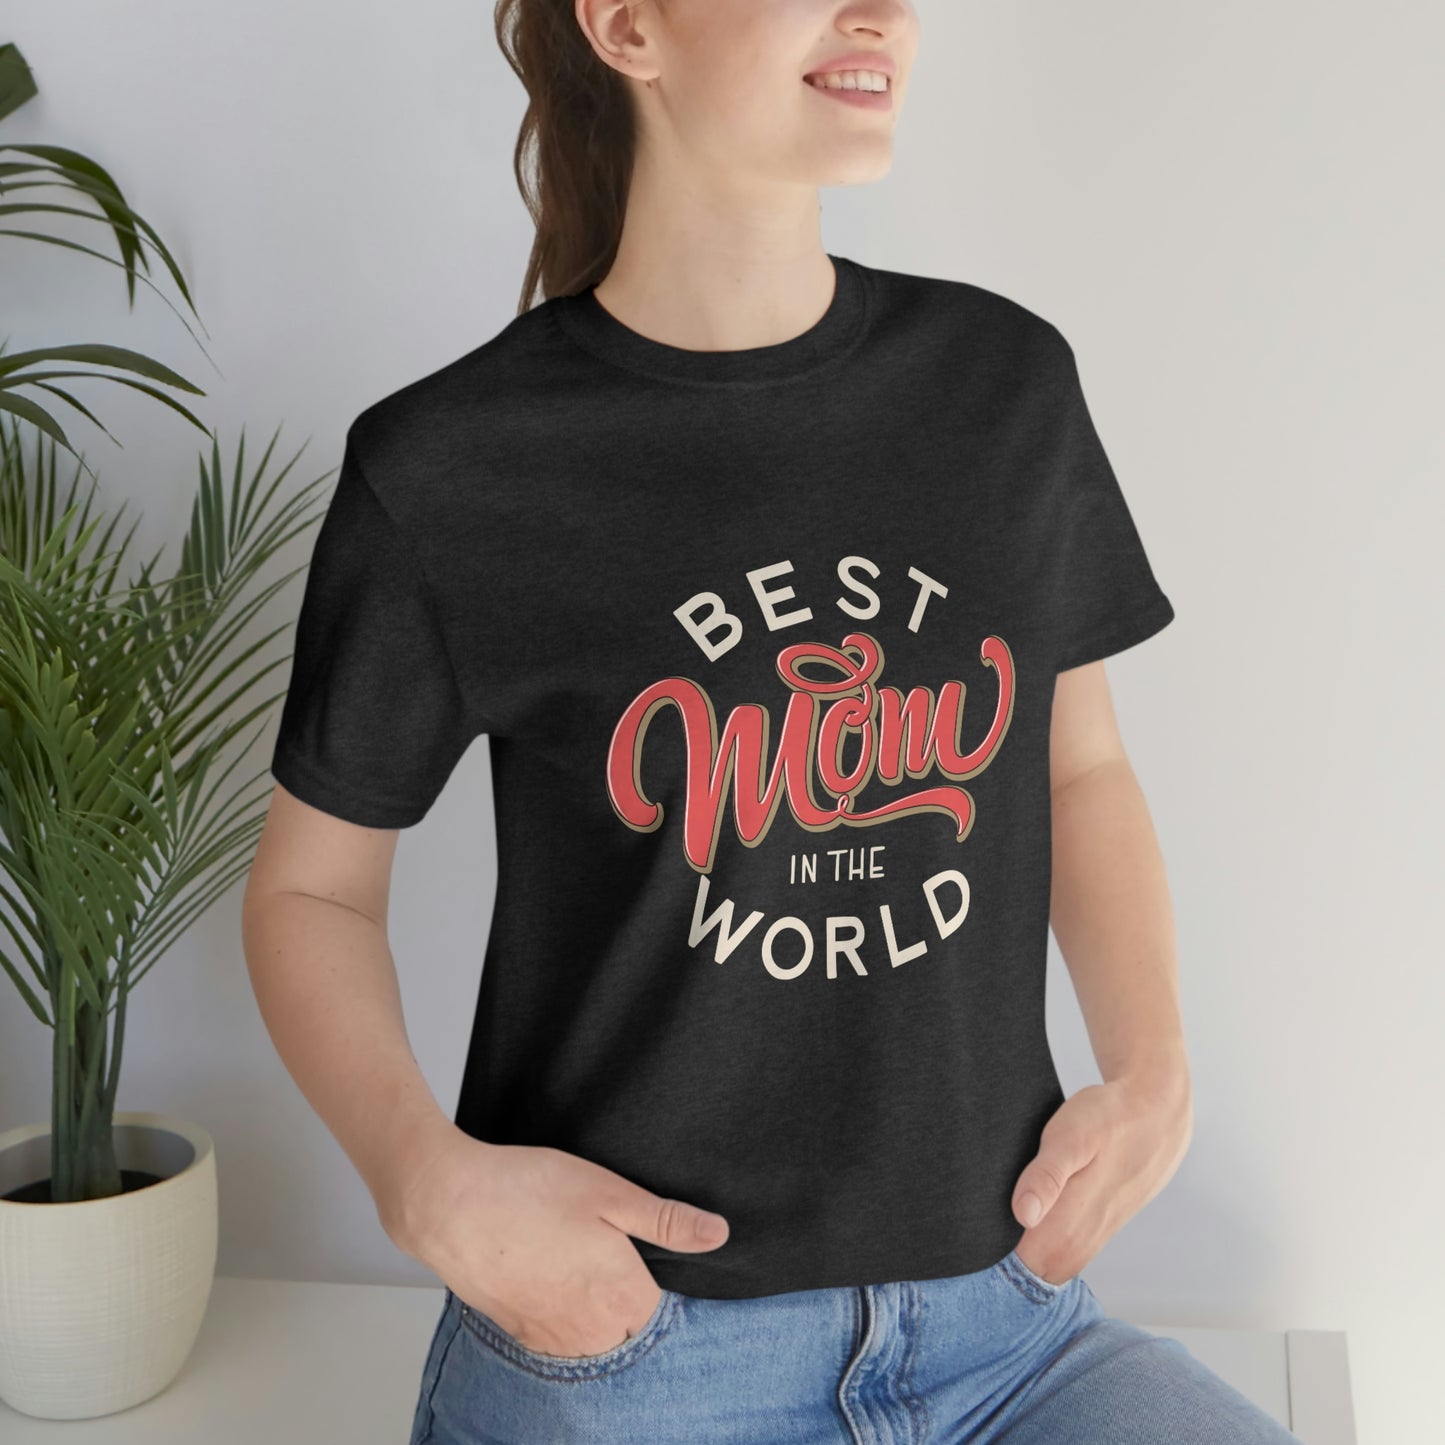 Best Mother's Day gift for Best Mom in the World. This dark grey t-shirt is a versatile and stylish addition to any Mom's wardrobe.